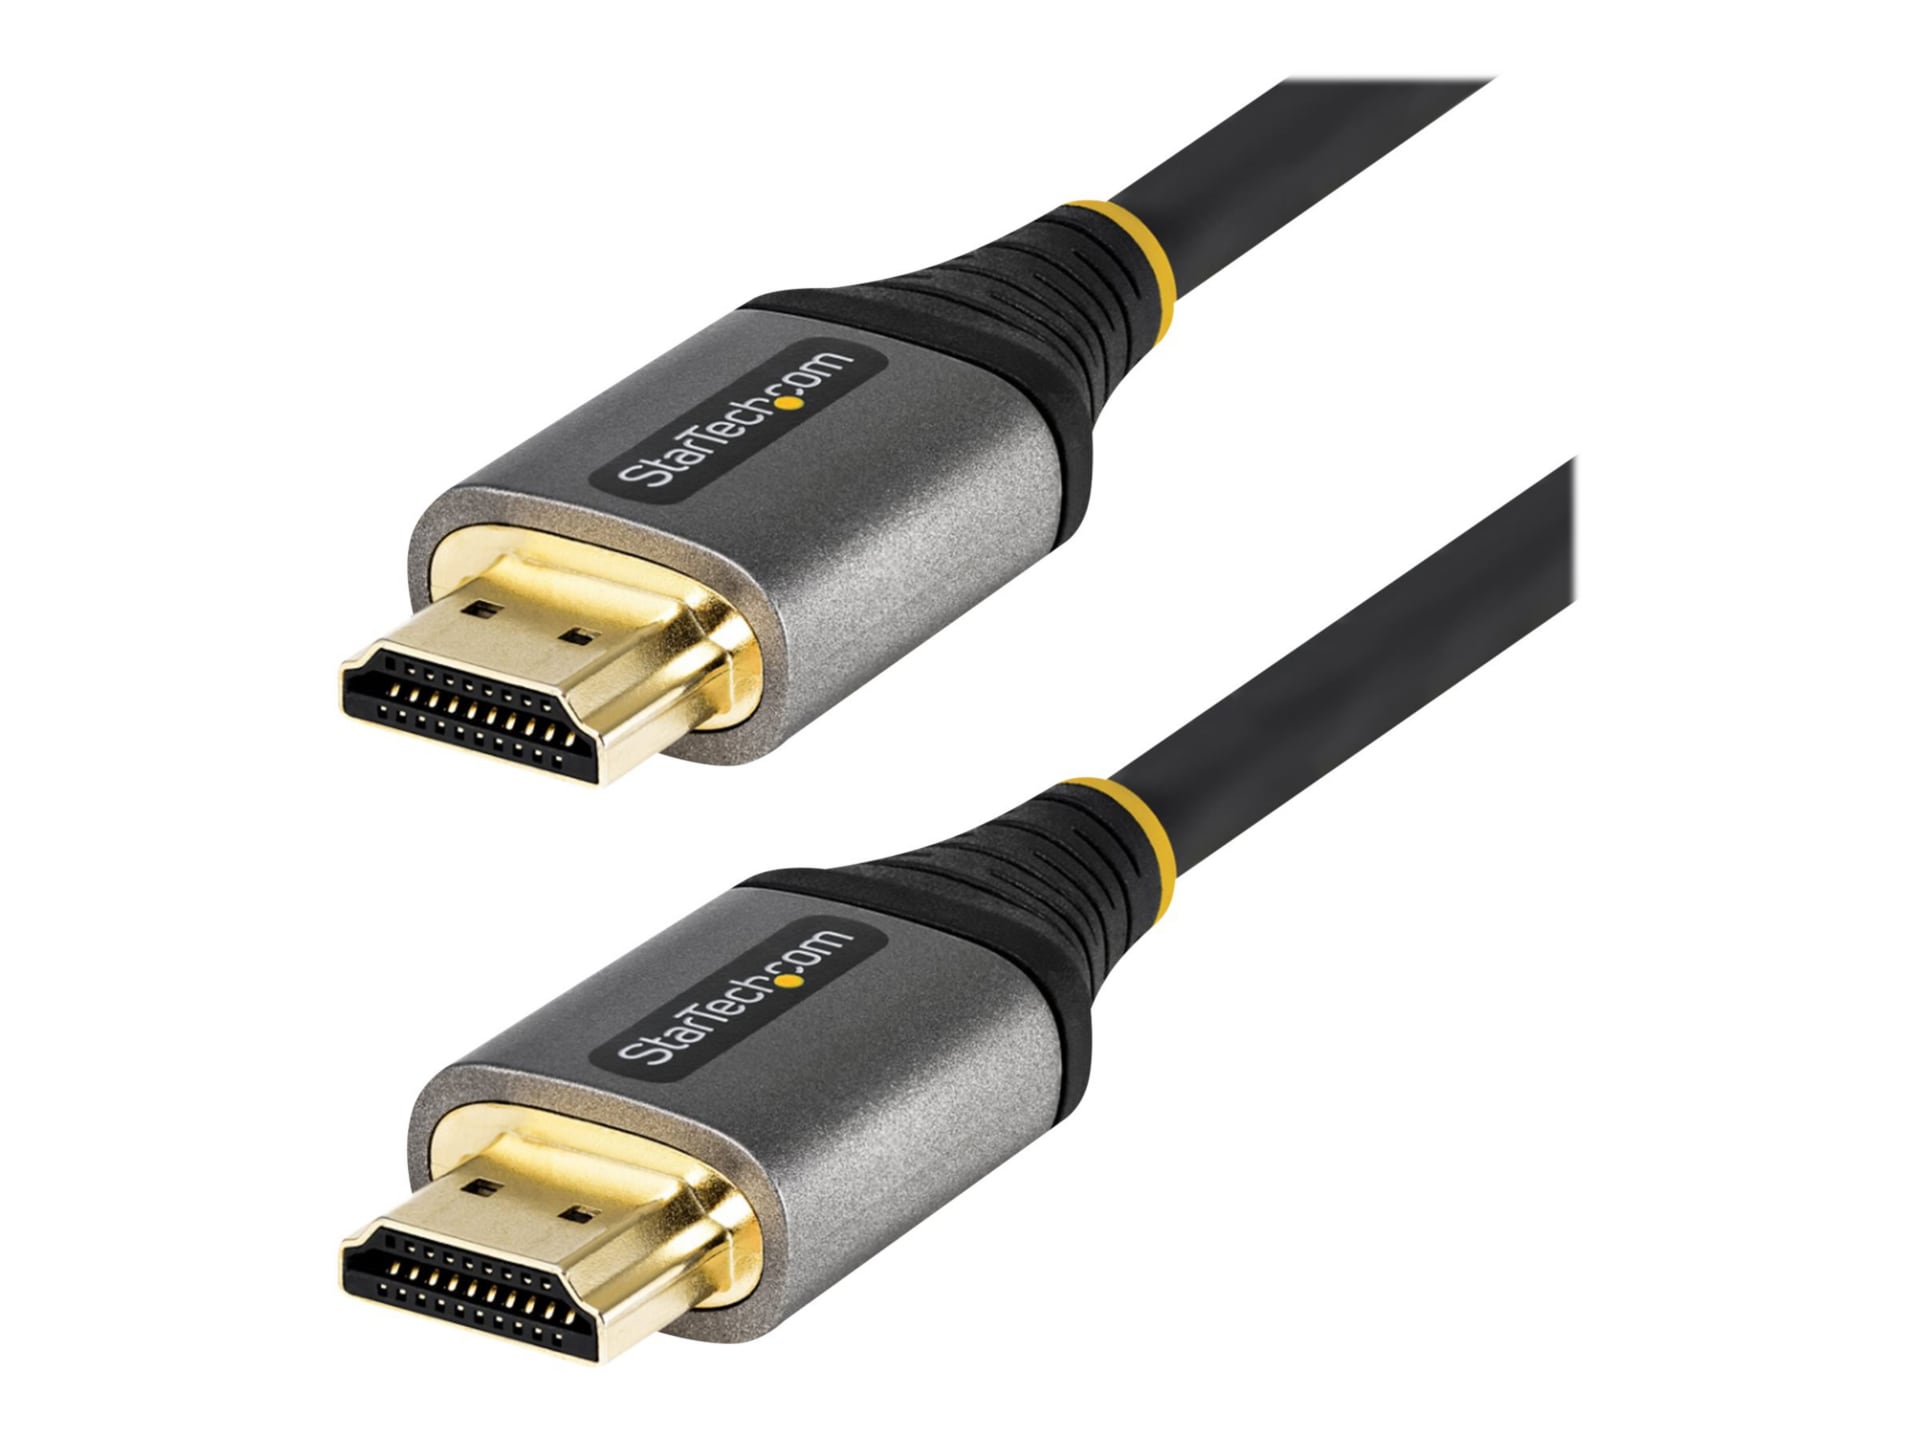 StarTech.com 16ft (5m) Premium Certified HDMI 2.0 Cable, High Speed Ultra HD 4K 60Hz HDMI Cable w/ Ethernet, HDR10, UHD